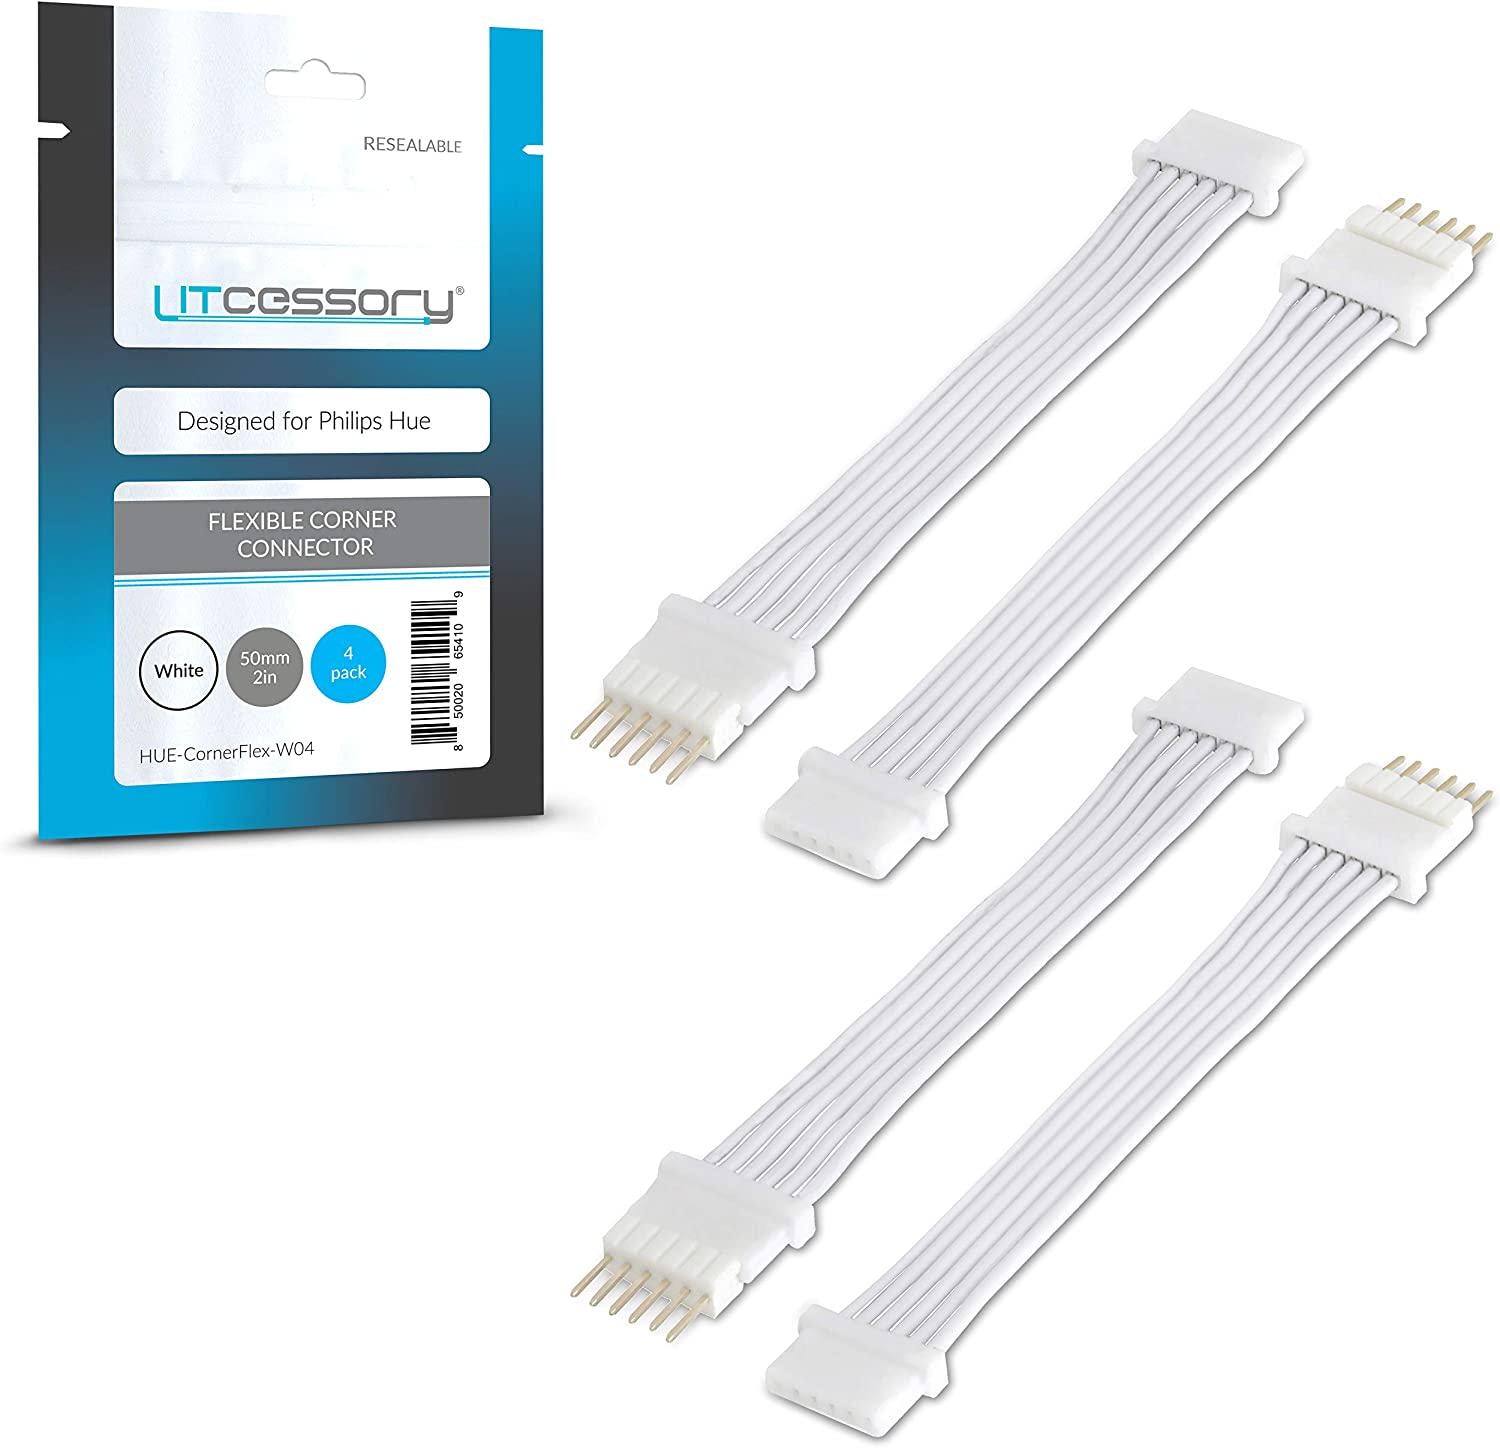 Litcessory, Litcessory Flexible Corner Connector/Extension Cable for Philips Hue Lightstrip Plus (50mm, 4 Pack, White - Micro 6-PIN V4)